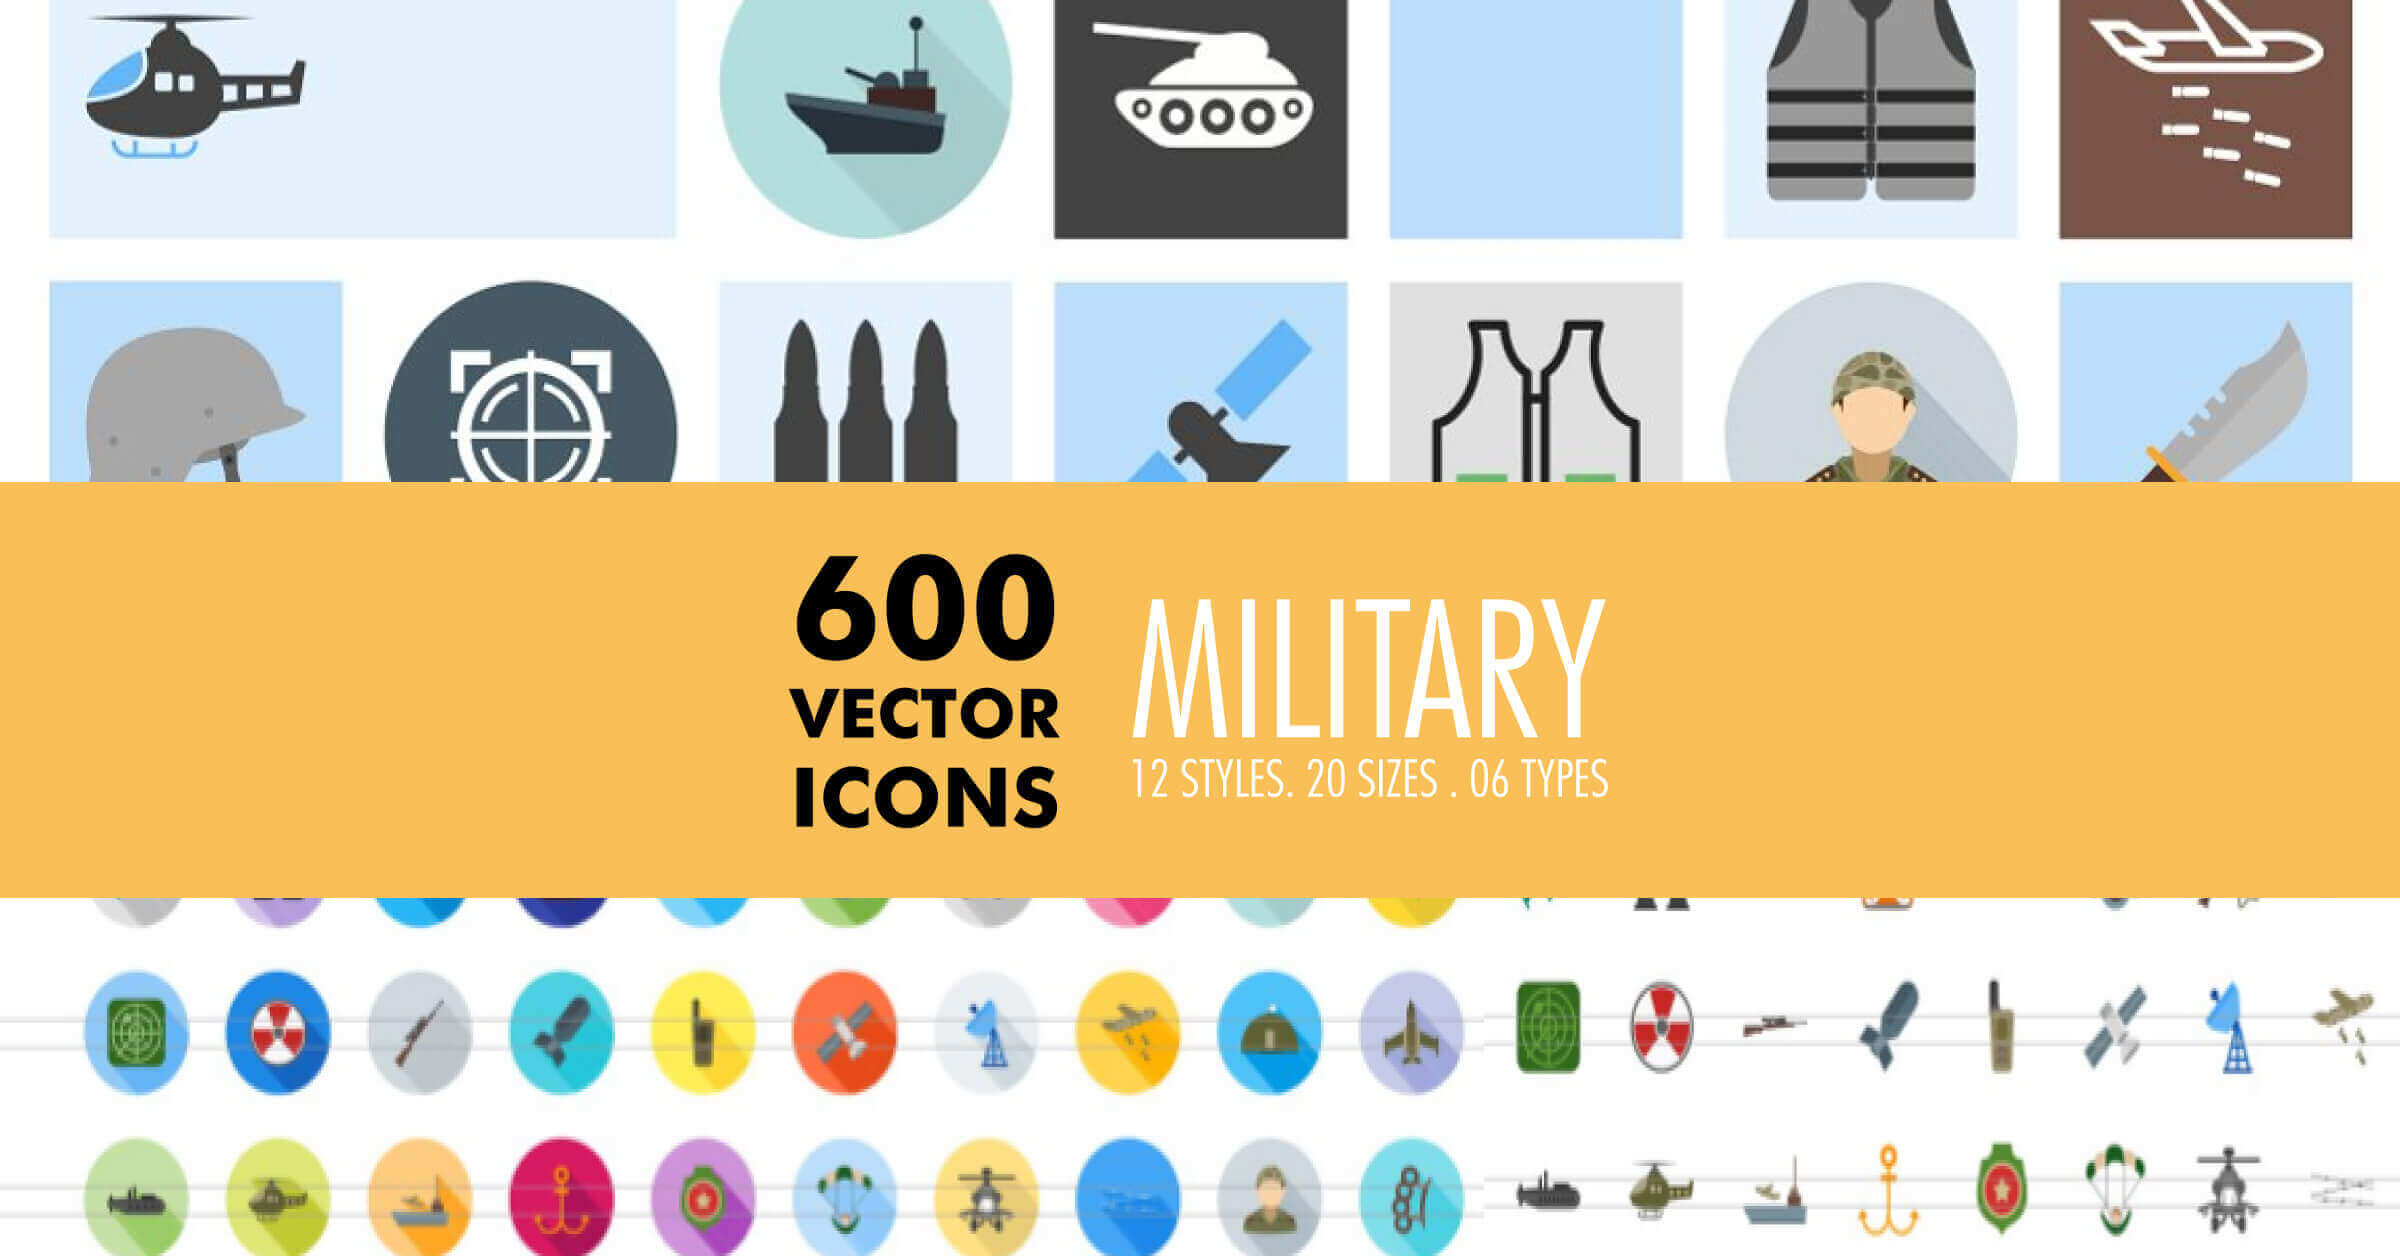 600 icons of melee weapons, scopes, tanks, bullets and everything related to war.